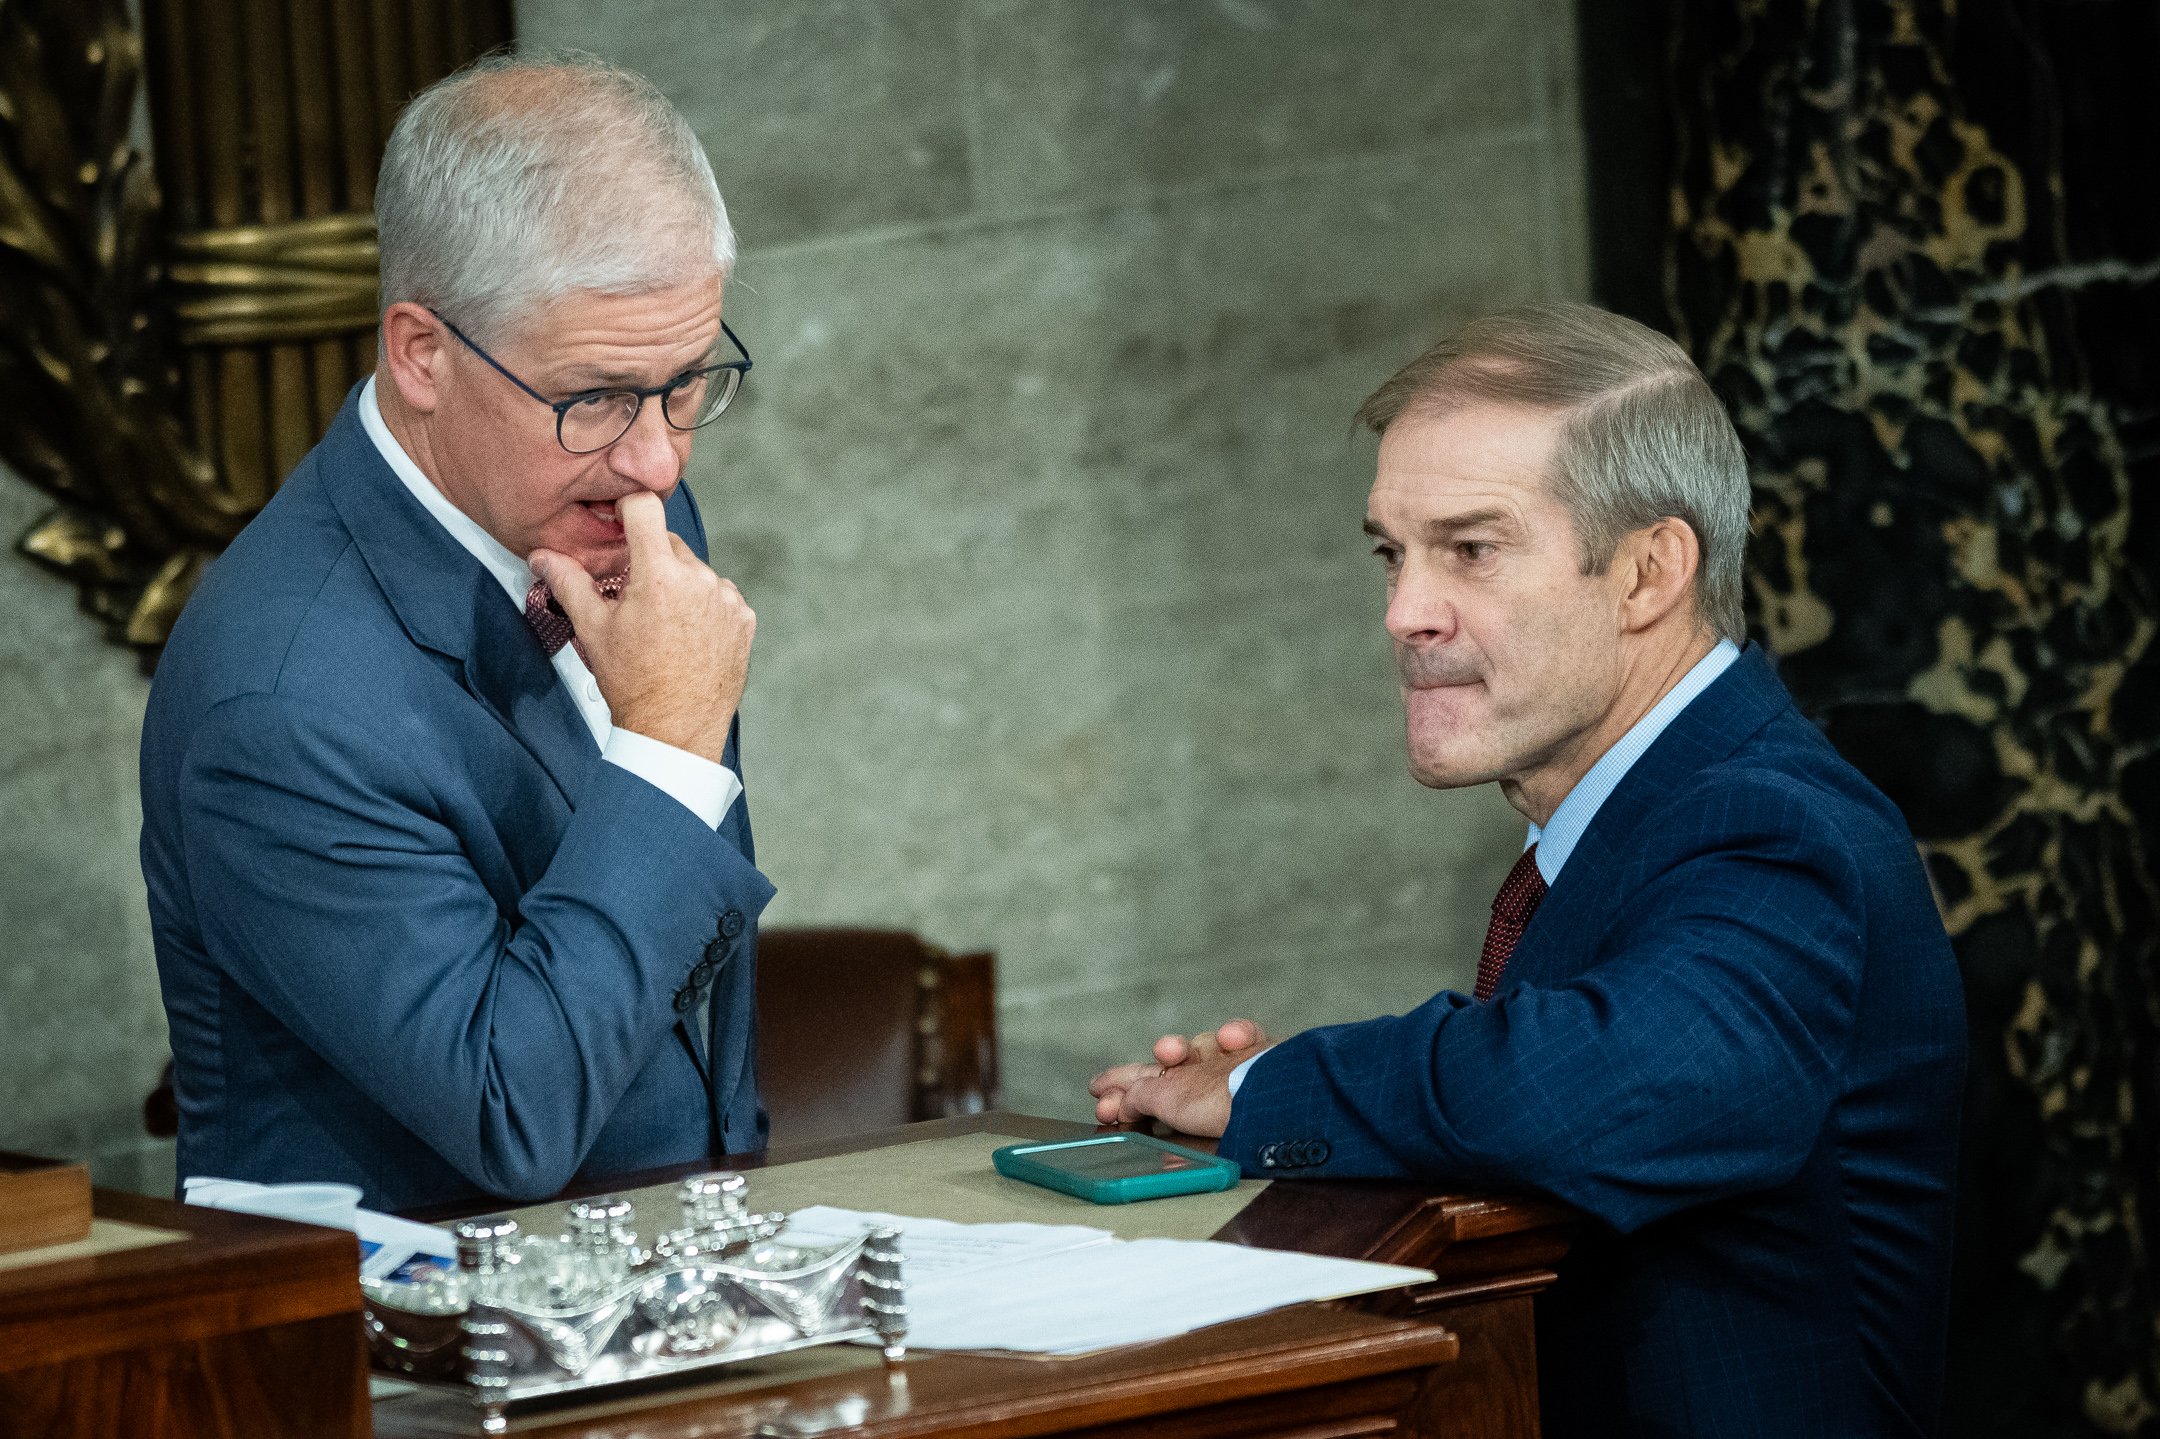  Representative Patrick McHenry (R-N.C.), the Speaker Pro Tempore of the House, speaks with Representative Jim Jordan (R-OH), the Speaker-designate of the Republican Conference, before a second round of voting for Speaker of the House begins, in the 